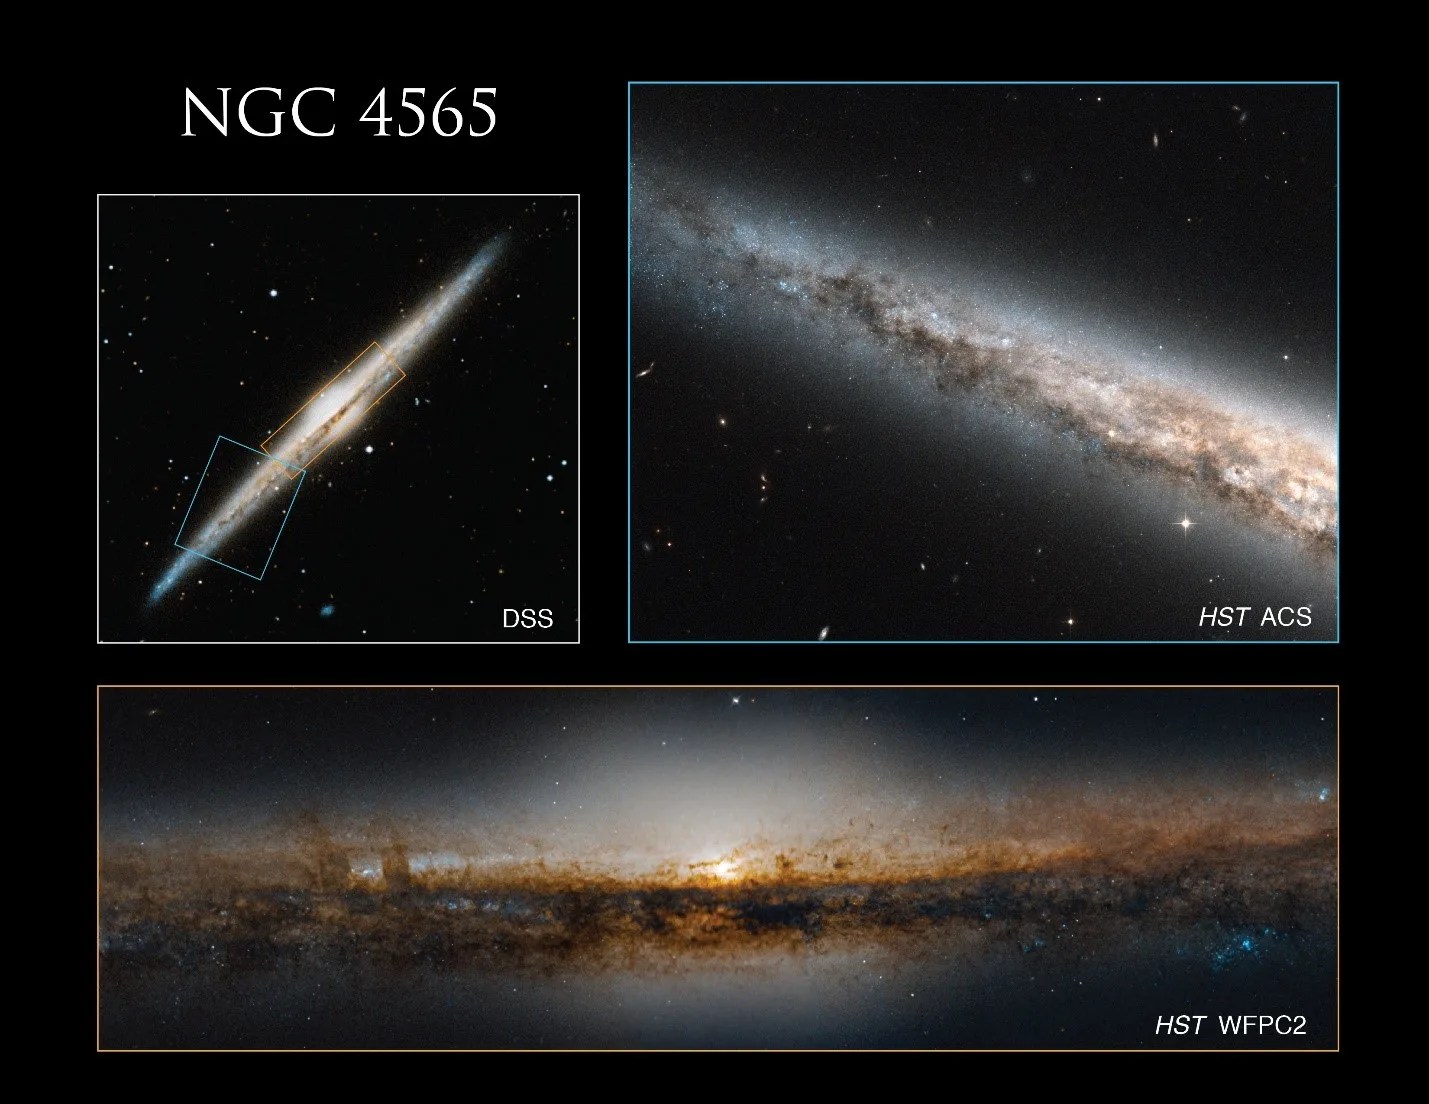 At the top left of the image is a ground based image of Galaxy C38. It is viewed nearly edge on, so it appears to be just a spear of light with a thicker center due to the core. On the top right is a Hubble image showing a close up view of the arm of the galaxy, blue and white and purple dust enmeshed with countless stars. And at the bottom is the other Hubble image of the galaxy, with its dark thin arms due to the angle it is facing us, and a bright white core in the center.